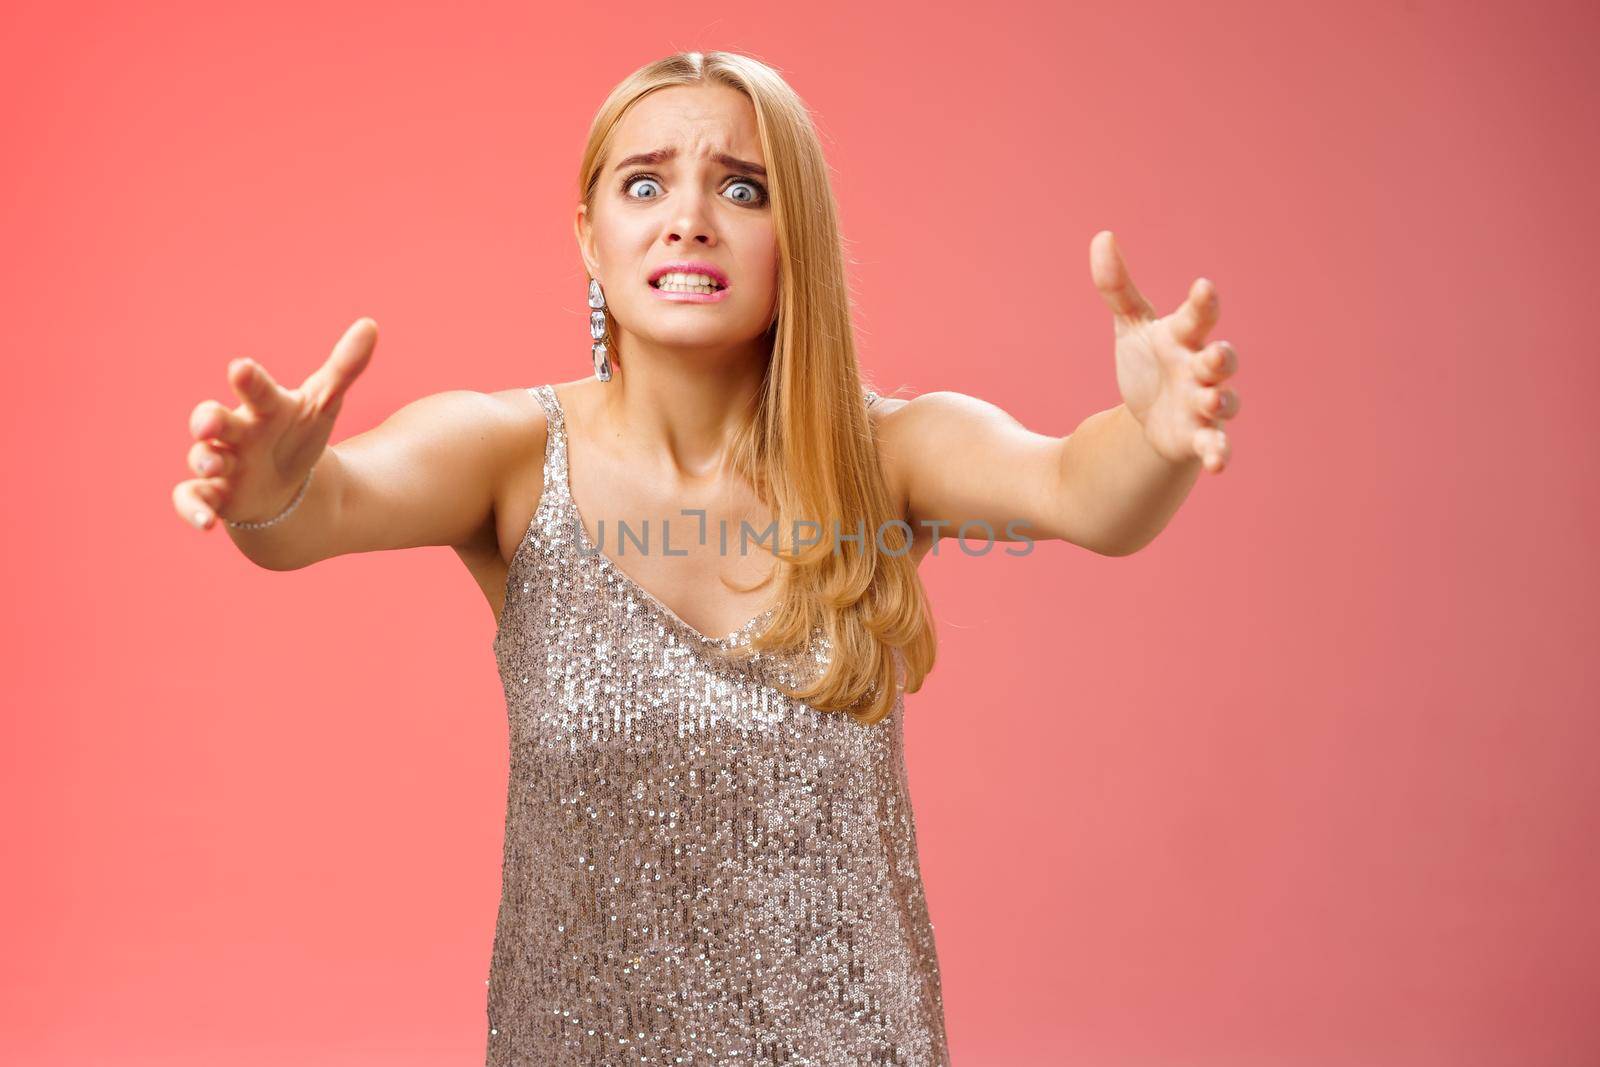 Obsessed ex-girlfriend widen eyes crazy clench teeth stretch hands forward wanna hold tight forever together standing crazy weird red background in silver dress clingy girl want hugs, cuddles.